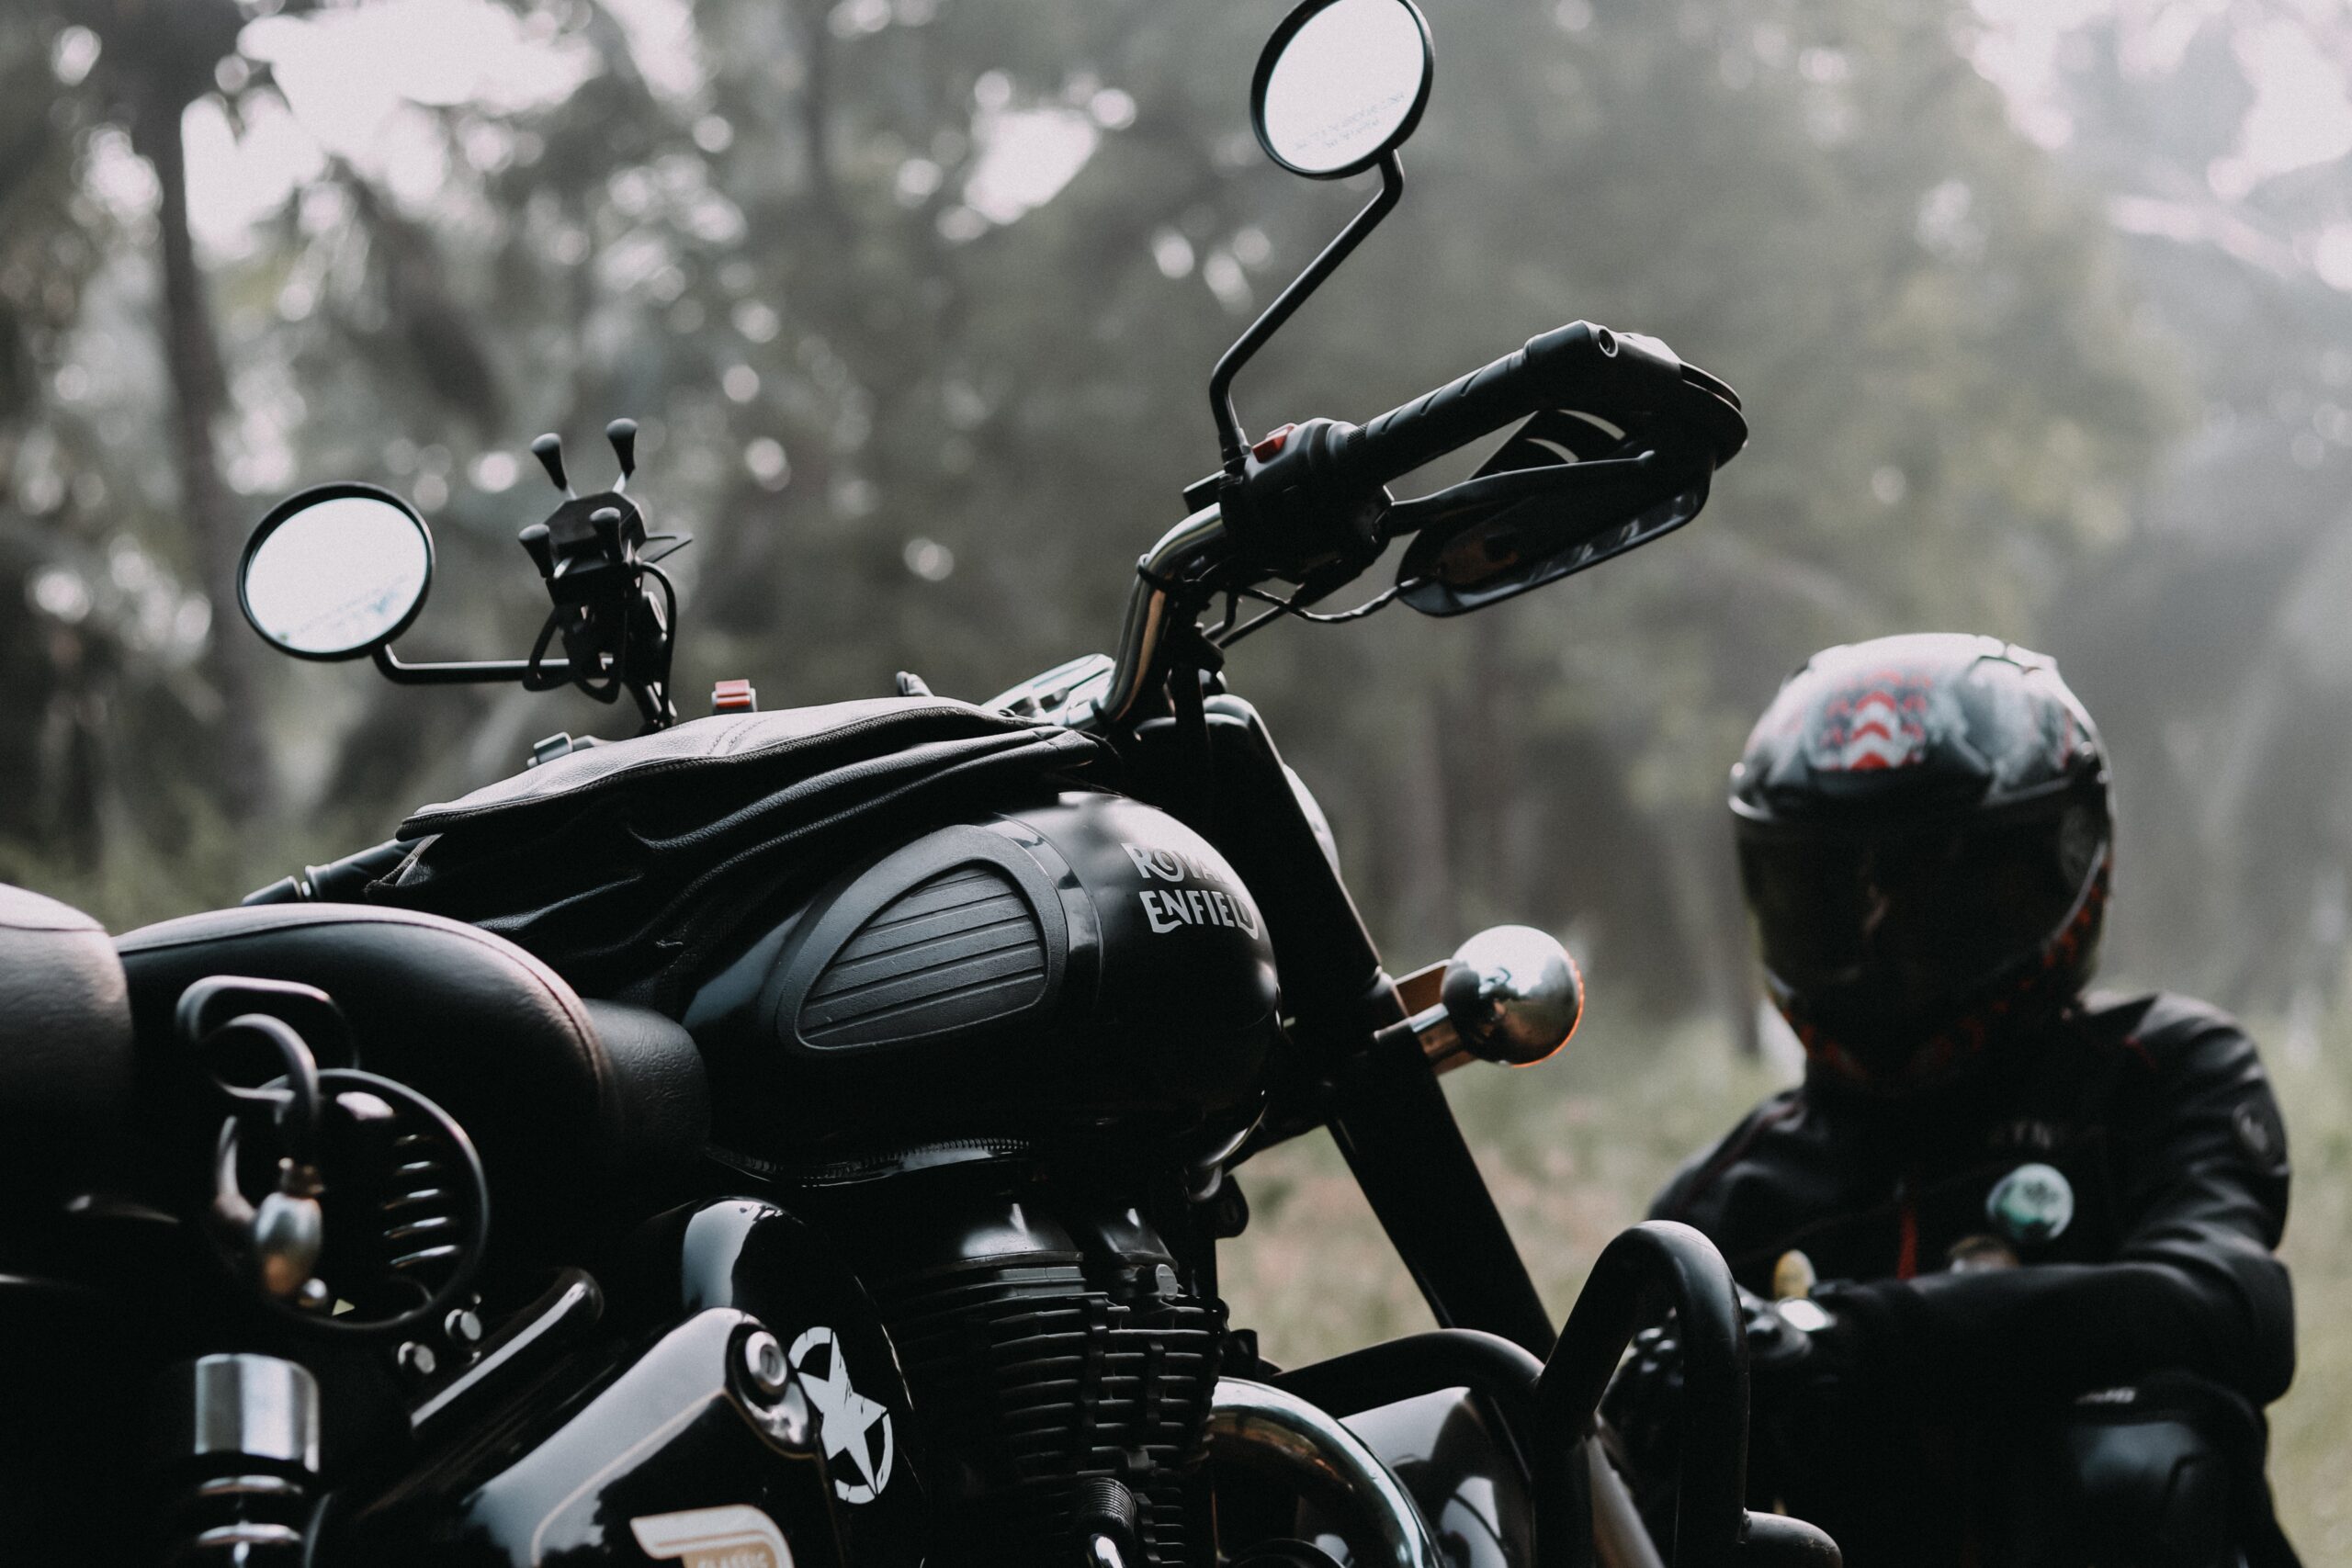 close up of black motorcycle with motorcyclist wearing black helmet in the background